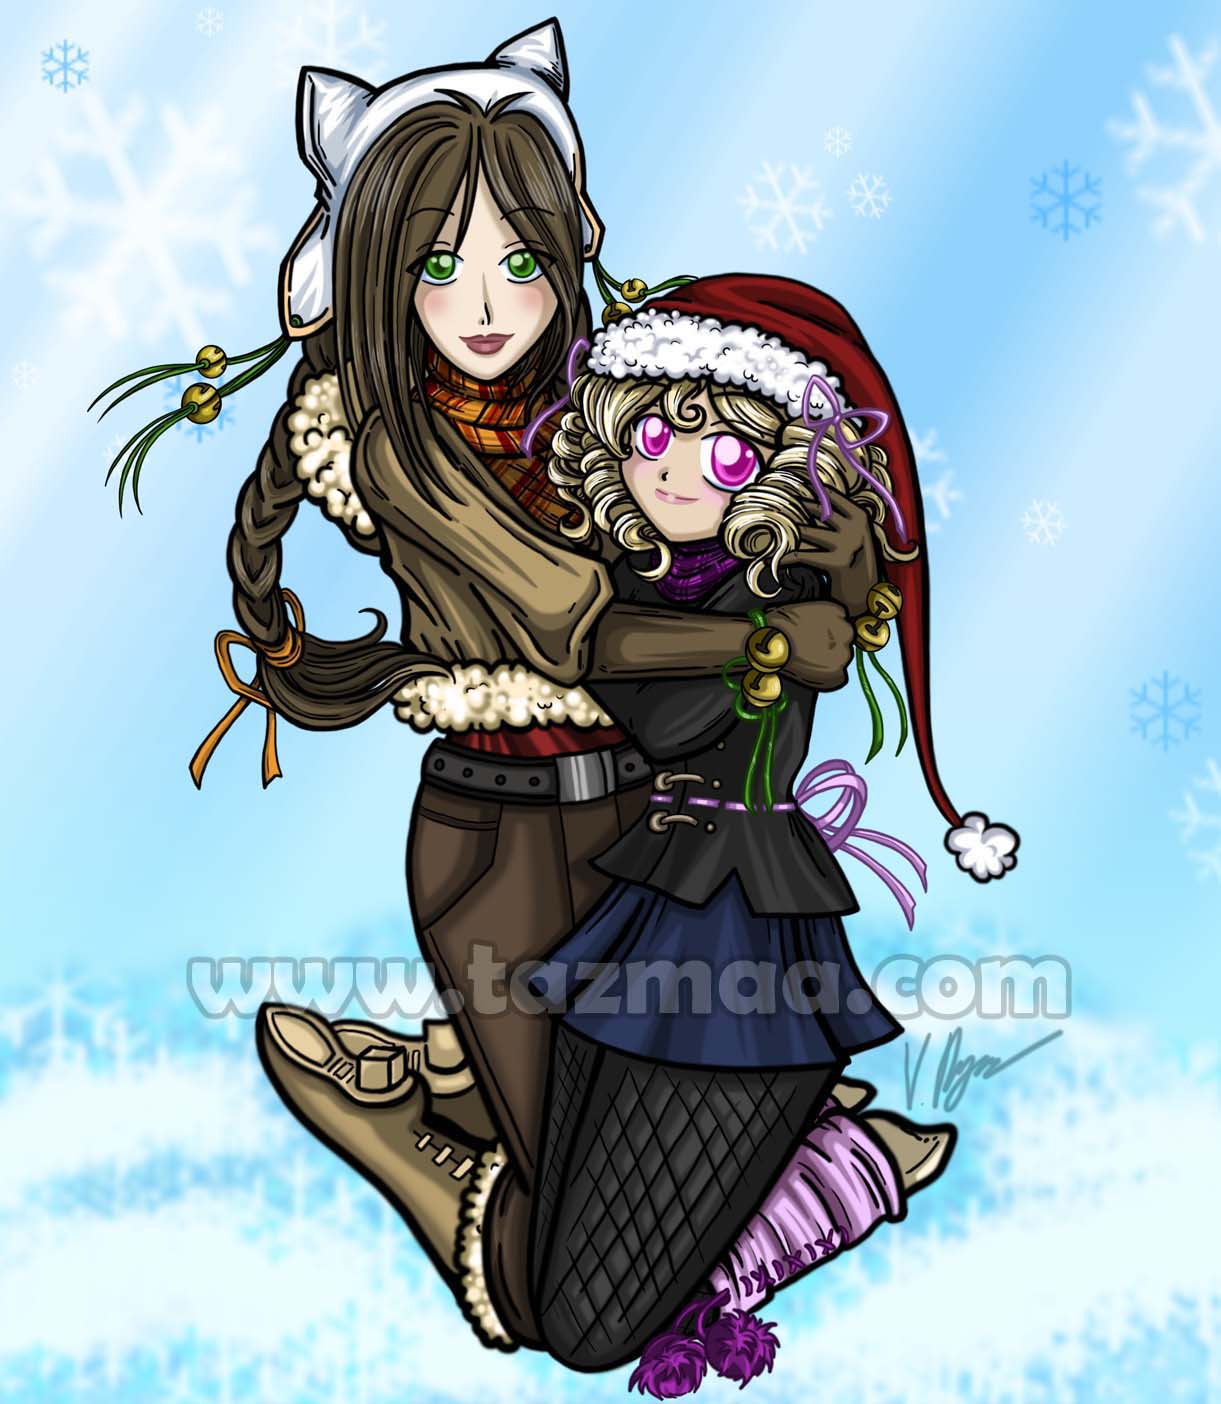 Anime Snuggling Winter Girls by Tazmaa